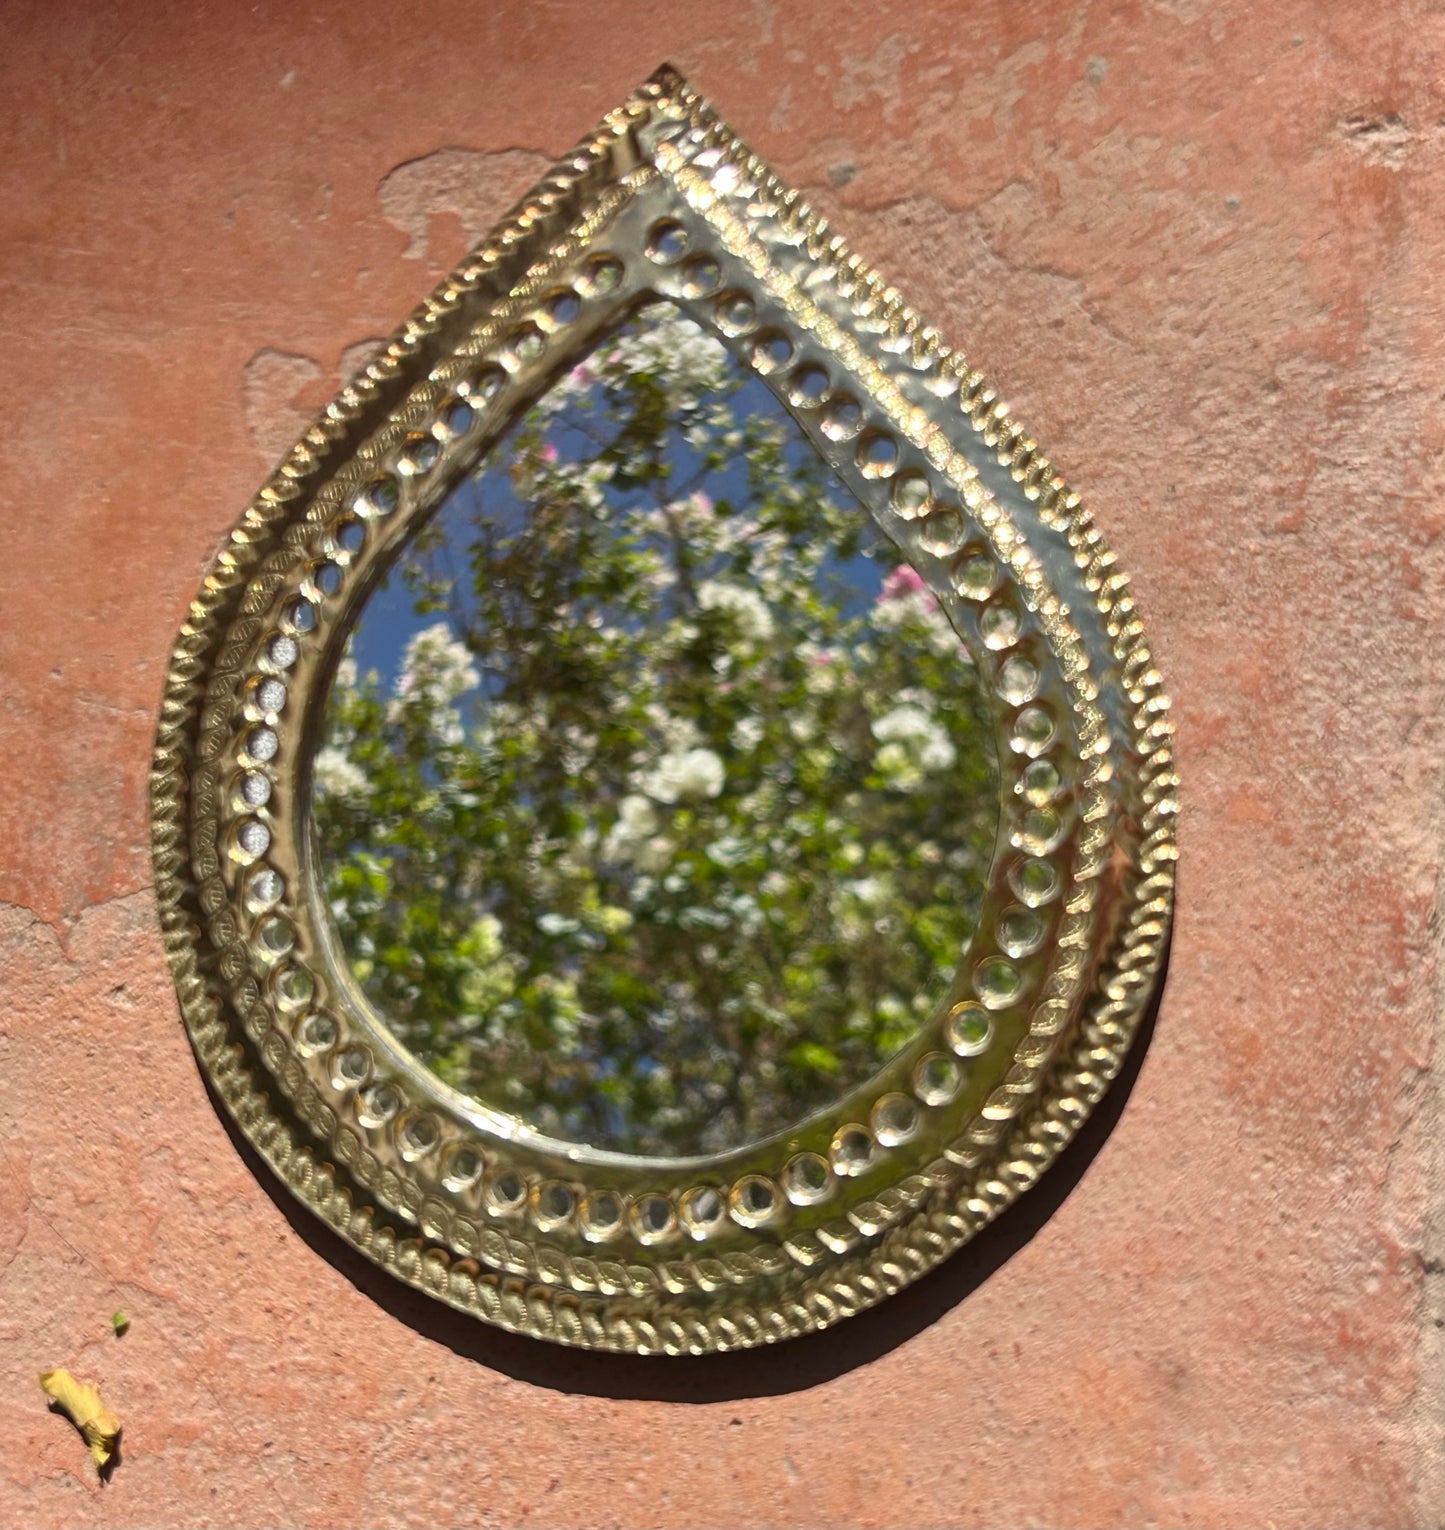 Moroccan mirrors made of brass